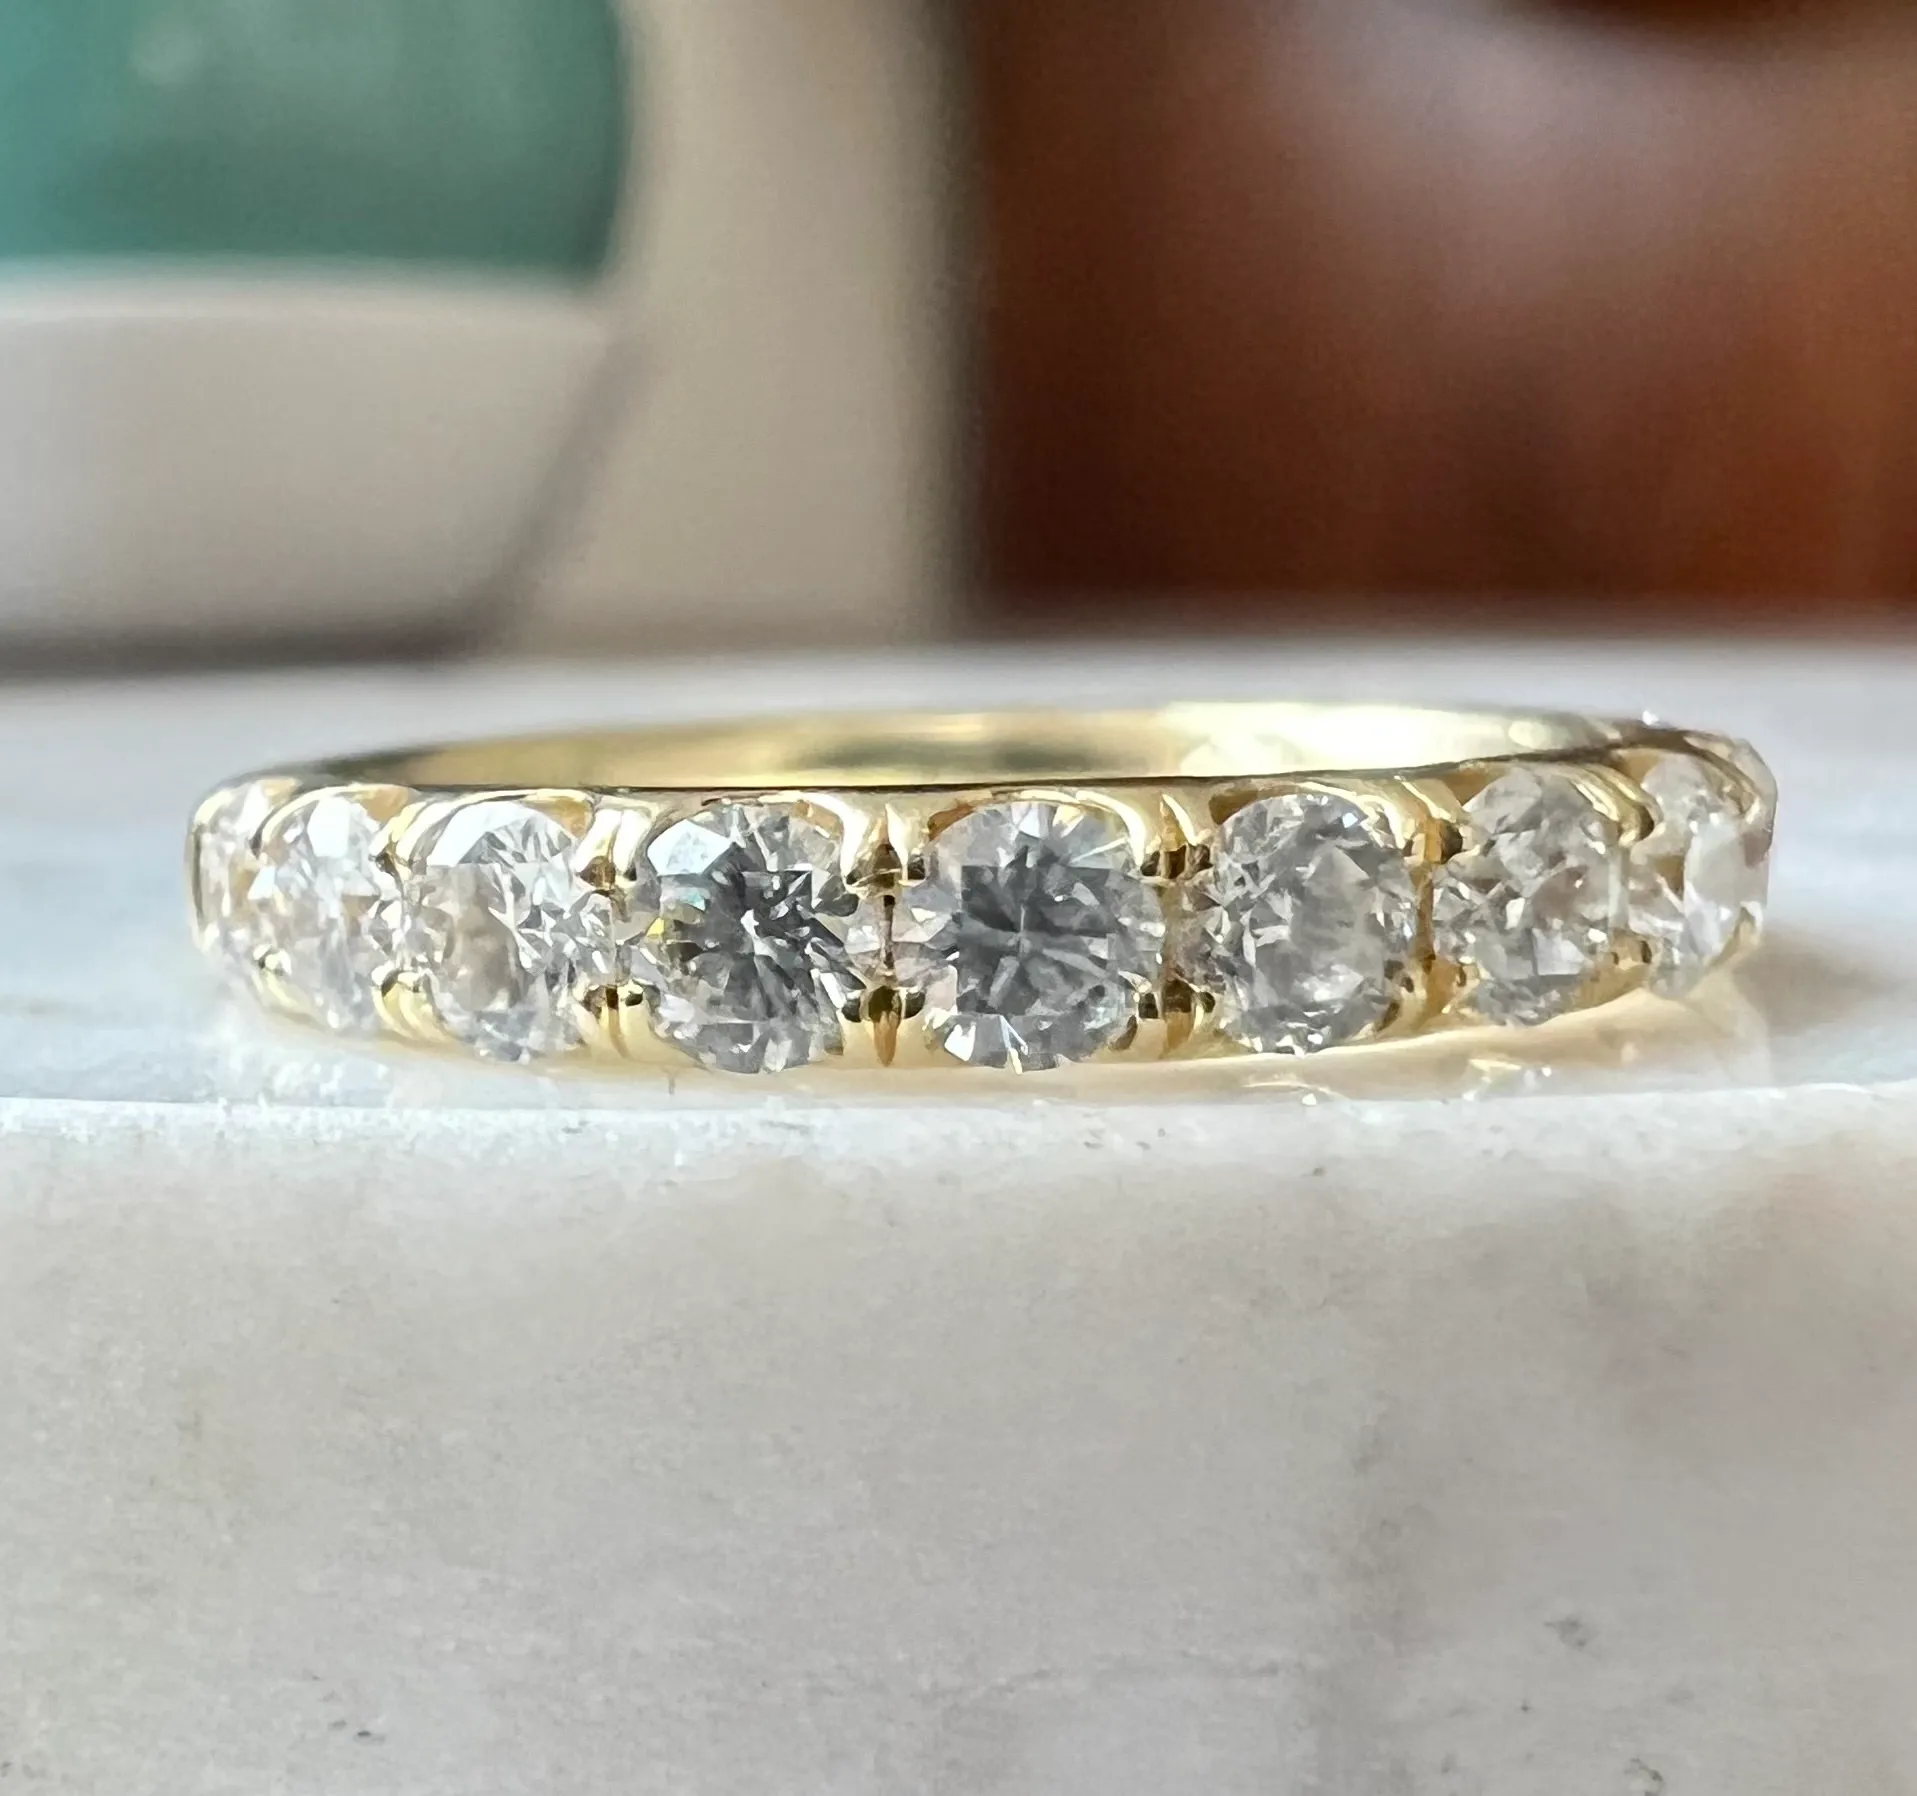 an estate 14 karat yellow gold wedding-style band with 11 round brilliant diamonds weighing 1 carat in prong settings.